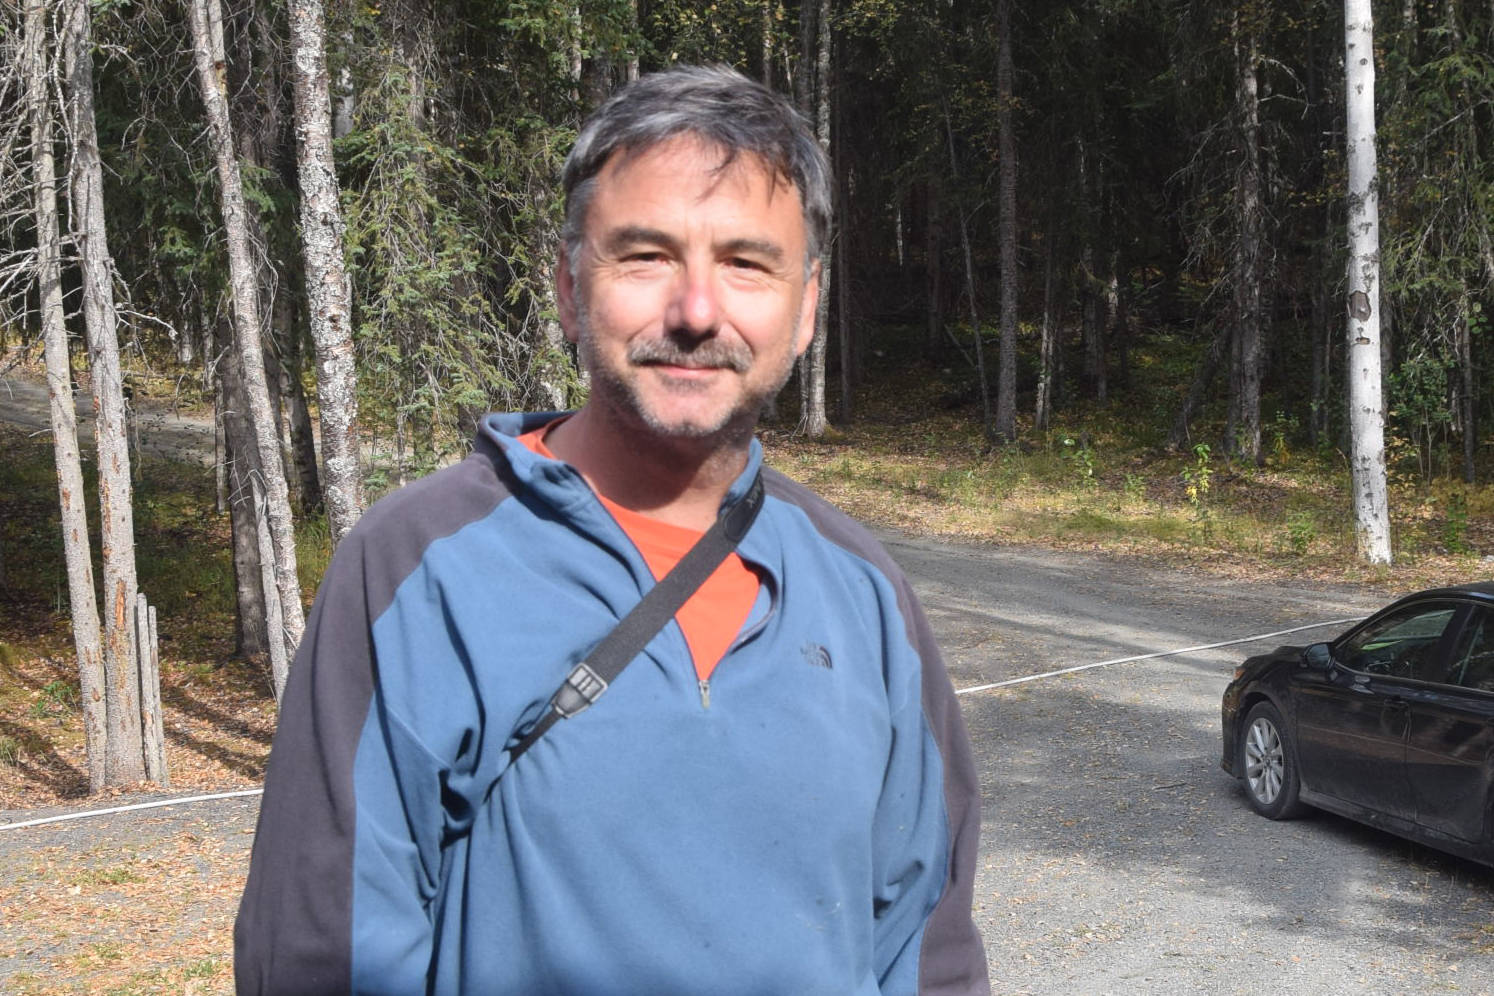 Michael Link, a homeowner in Cooper Landing, Alaska, can be seen here outside his home on Aug. 30, 2019. (Photo by Brian Mazurek/Peninsula Clarion)